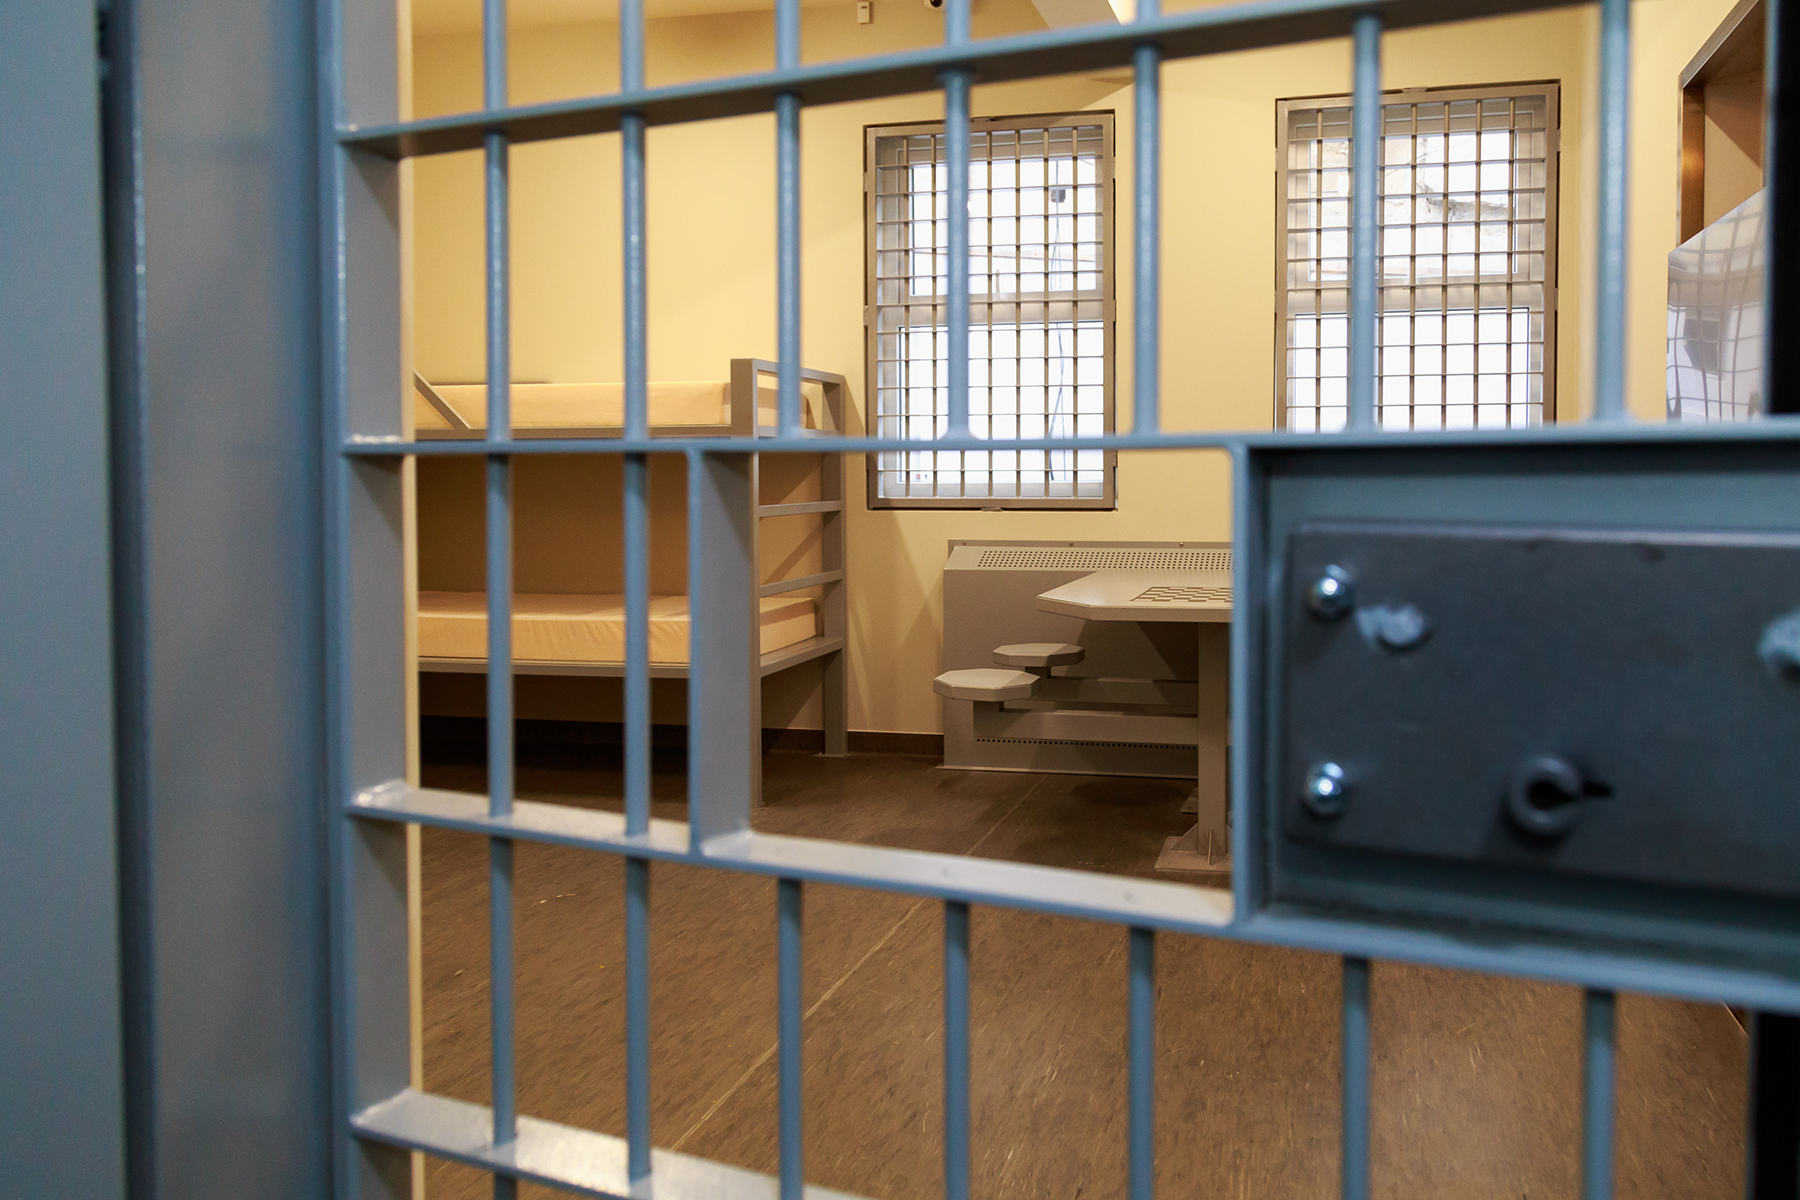 By the numbers: Jail incarceration fees in Wisconsin - Wisconsin Watch